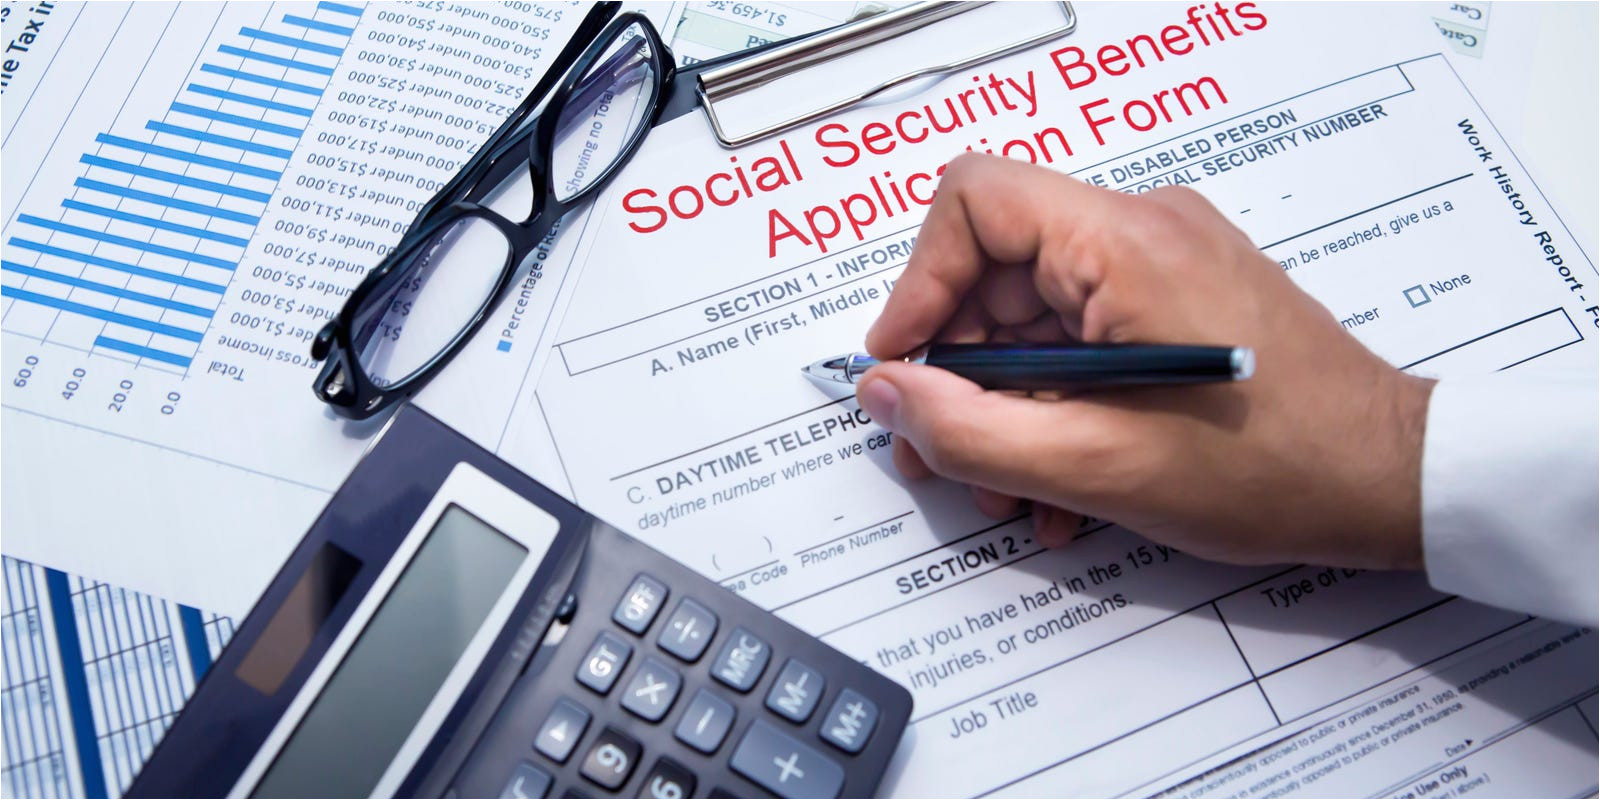 social security benefit application getty jpg